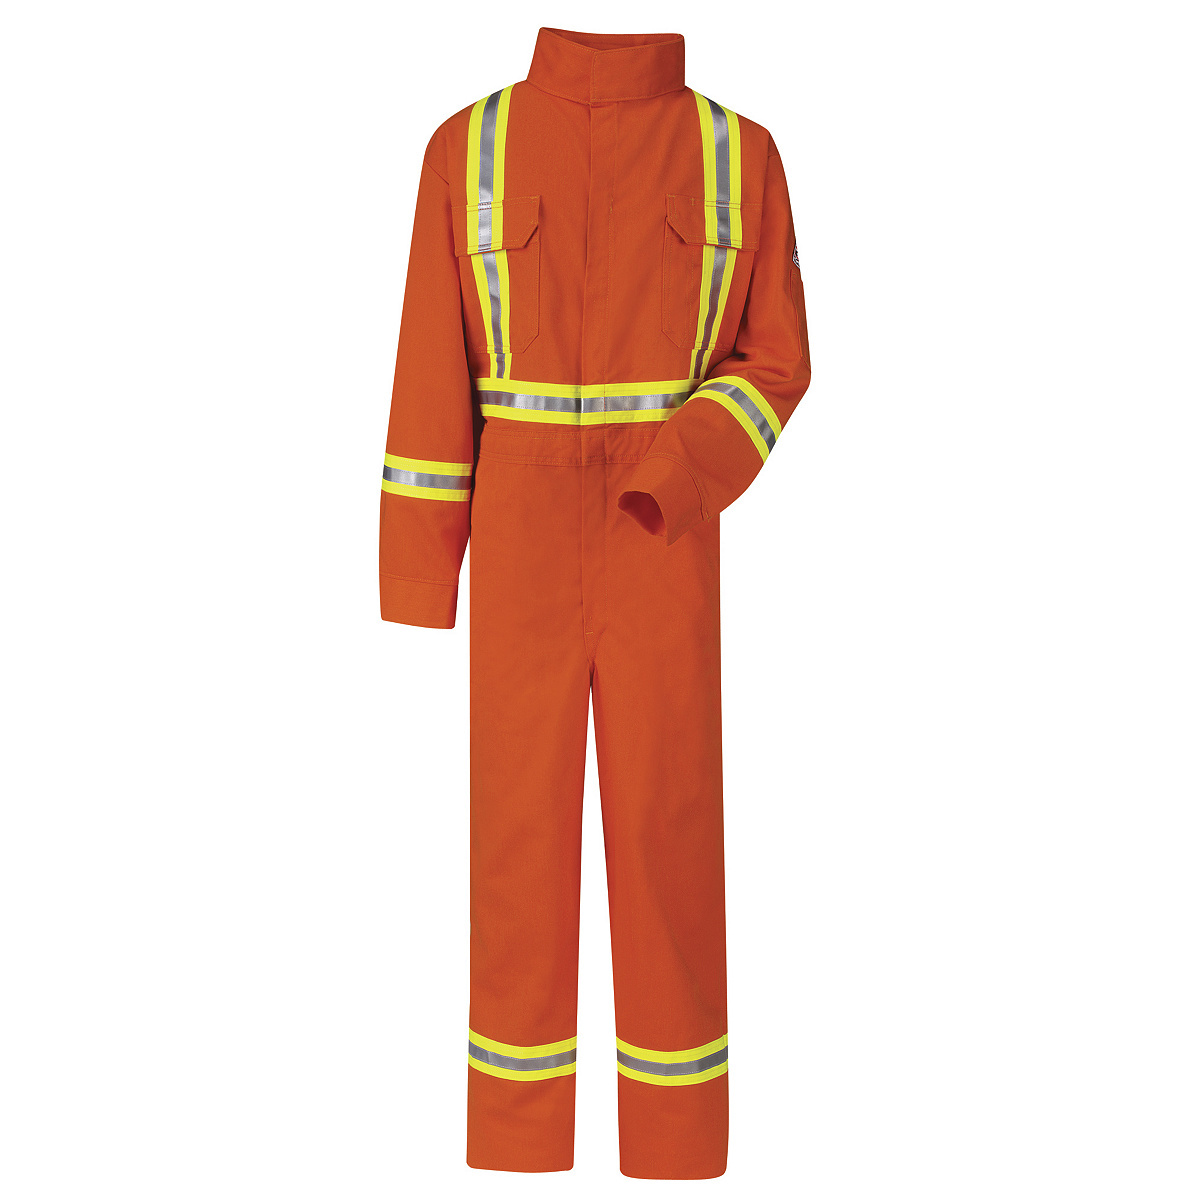 Bulwark® 54 Regular Orange Westex Ultrasoft® Twill/Cotton/Nylon Flame Resistant Coveralls With Zipper Front Closure And Reflecti